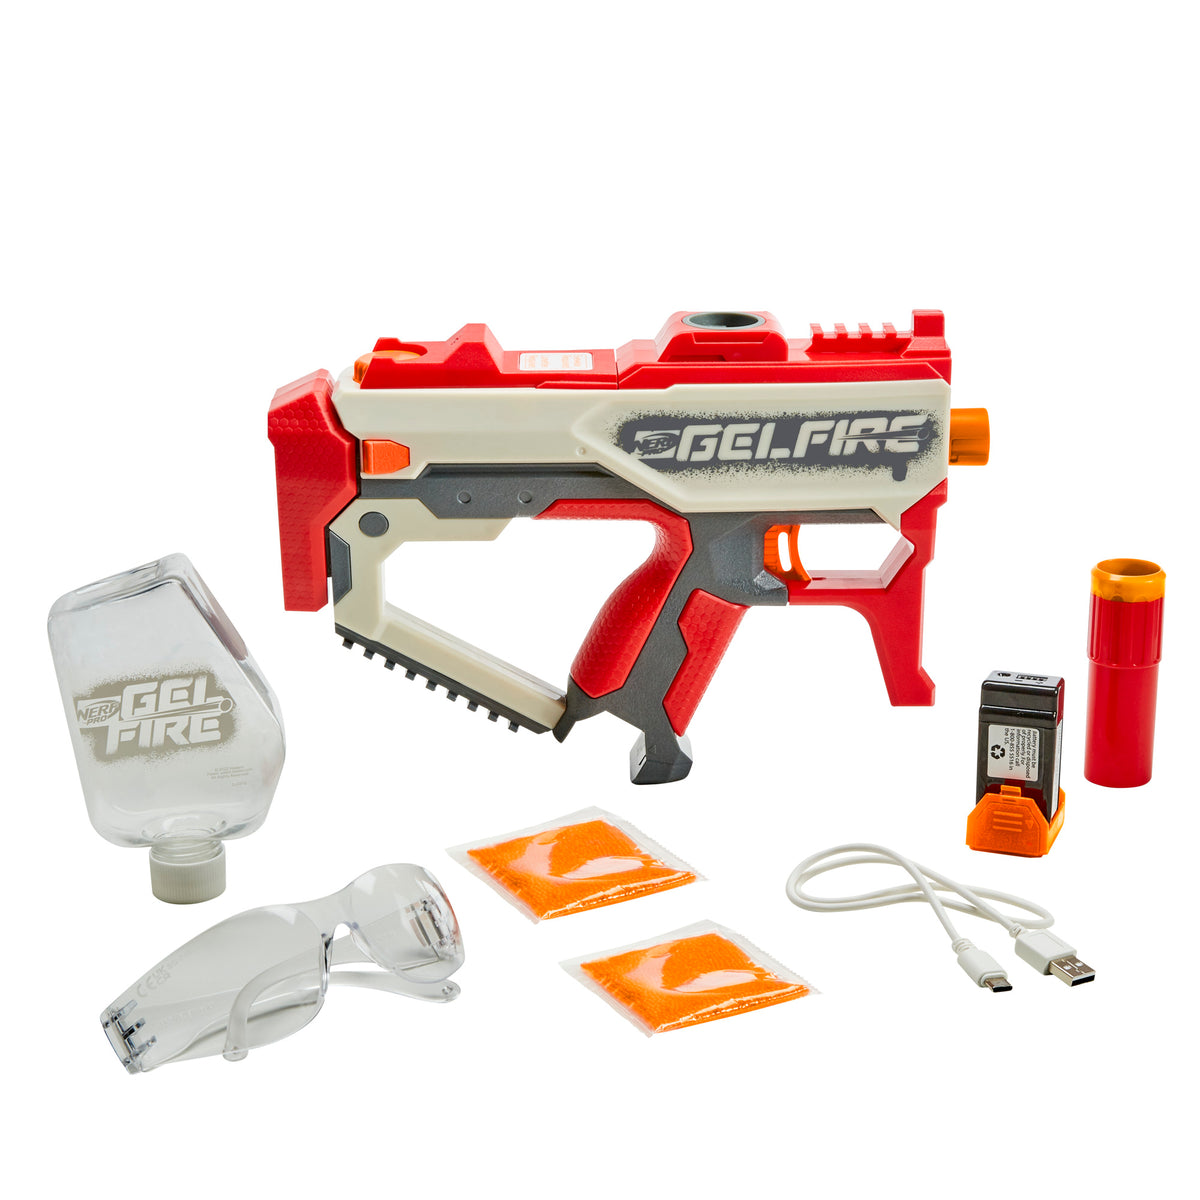 Nerf Pro Gelfire Mythic Full Auto Blaster & 10,000 Gelfire Rounds, 800  Round Hopper, Rechargeable Battery, Eyewear, Ages 14 & Up